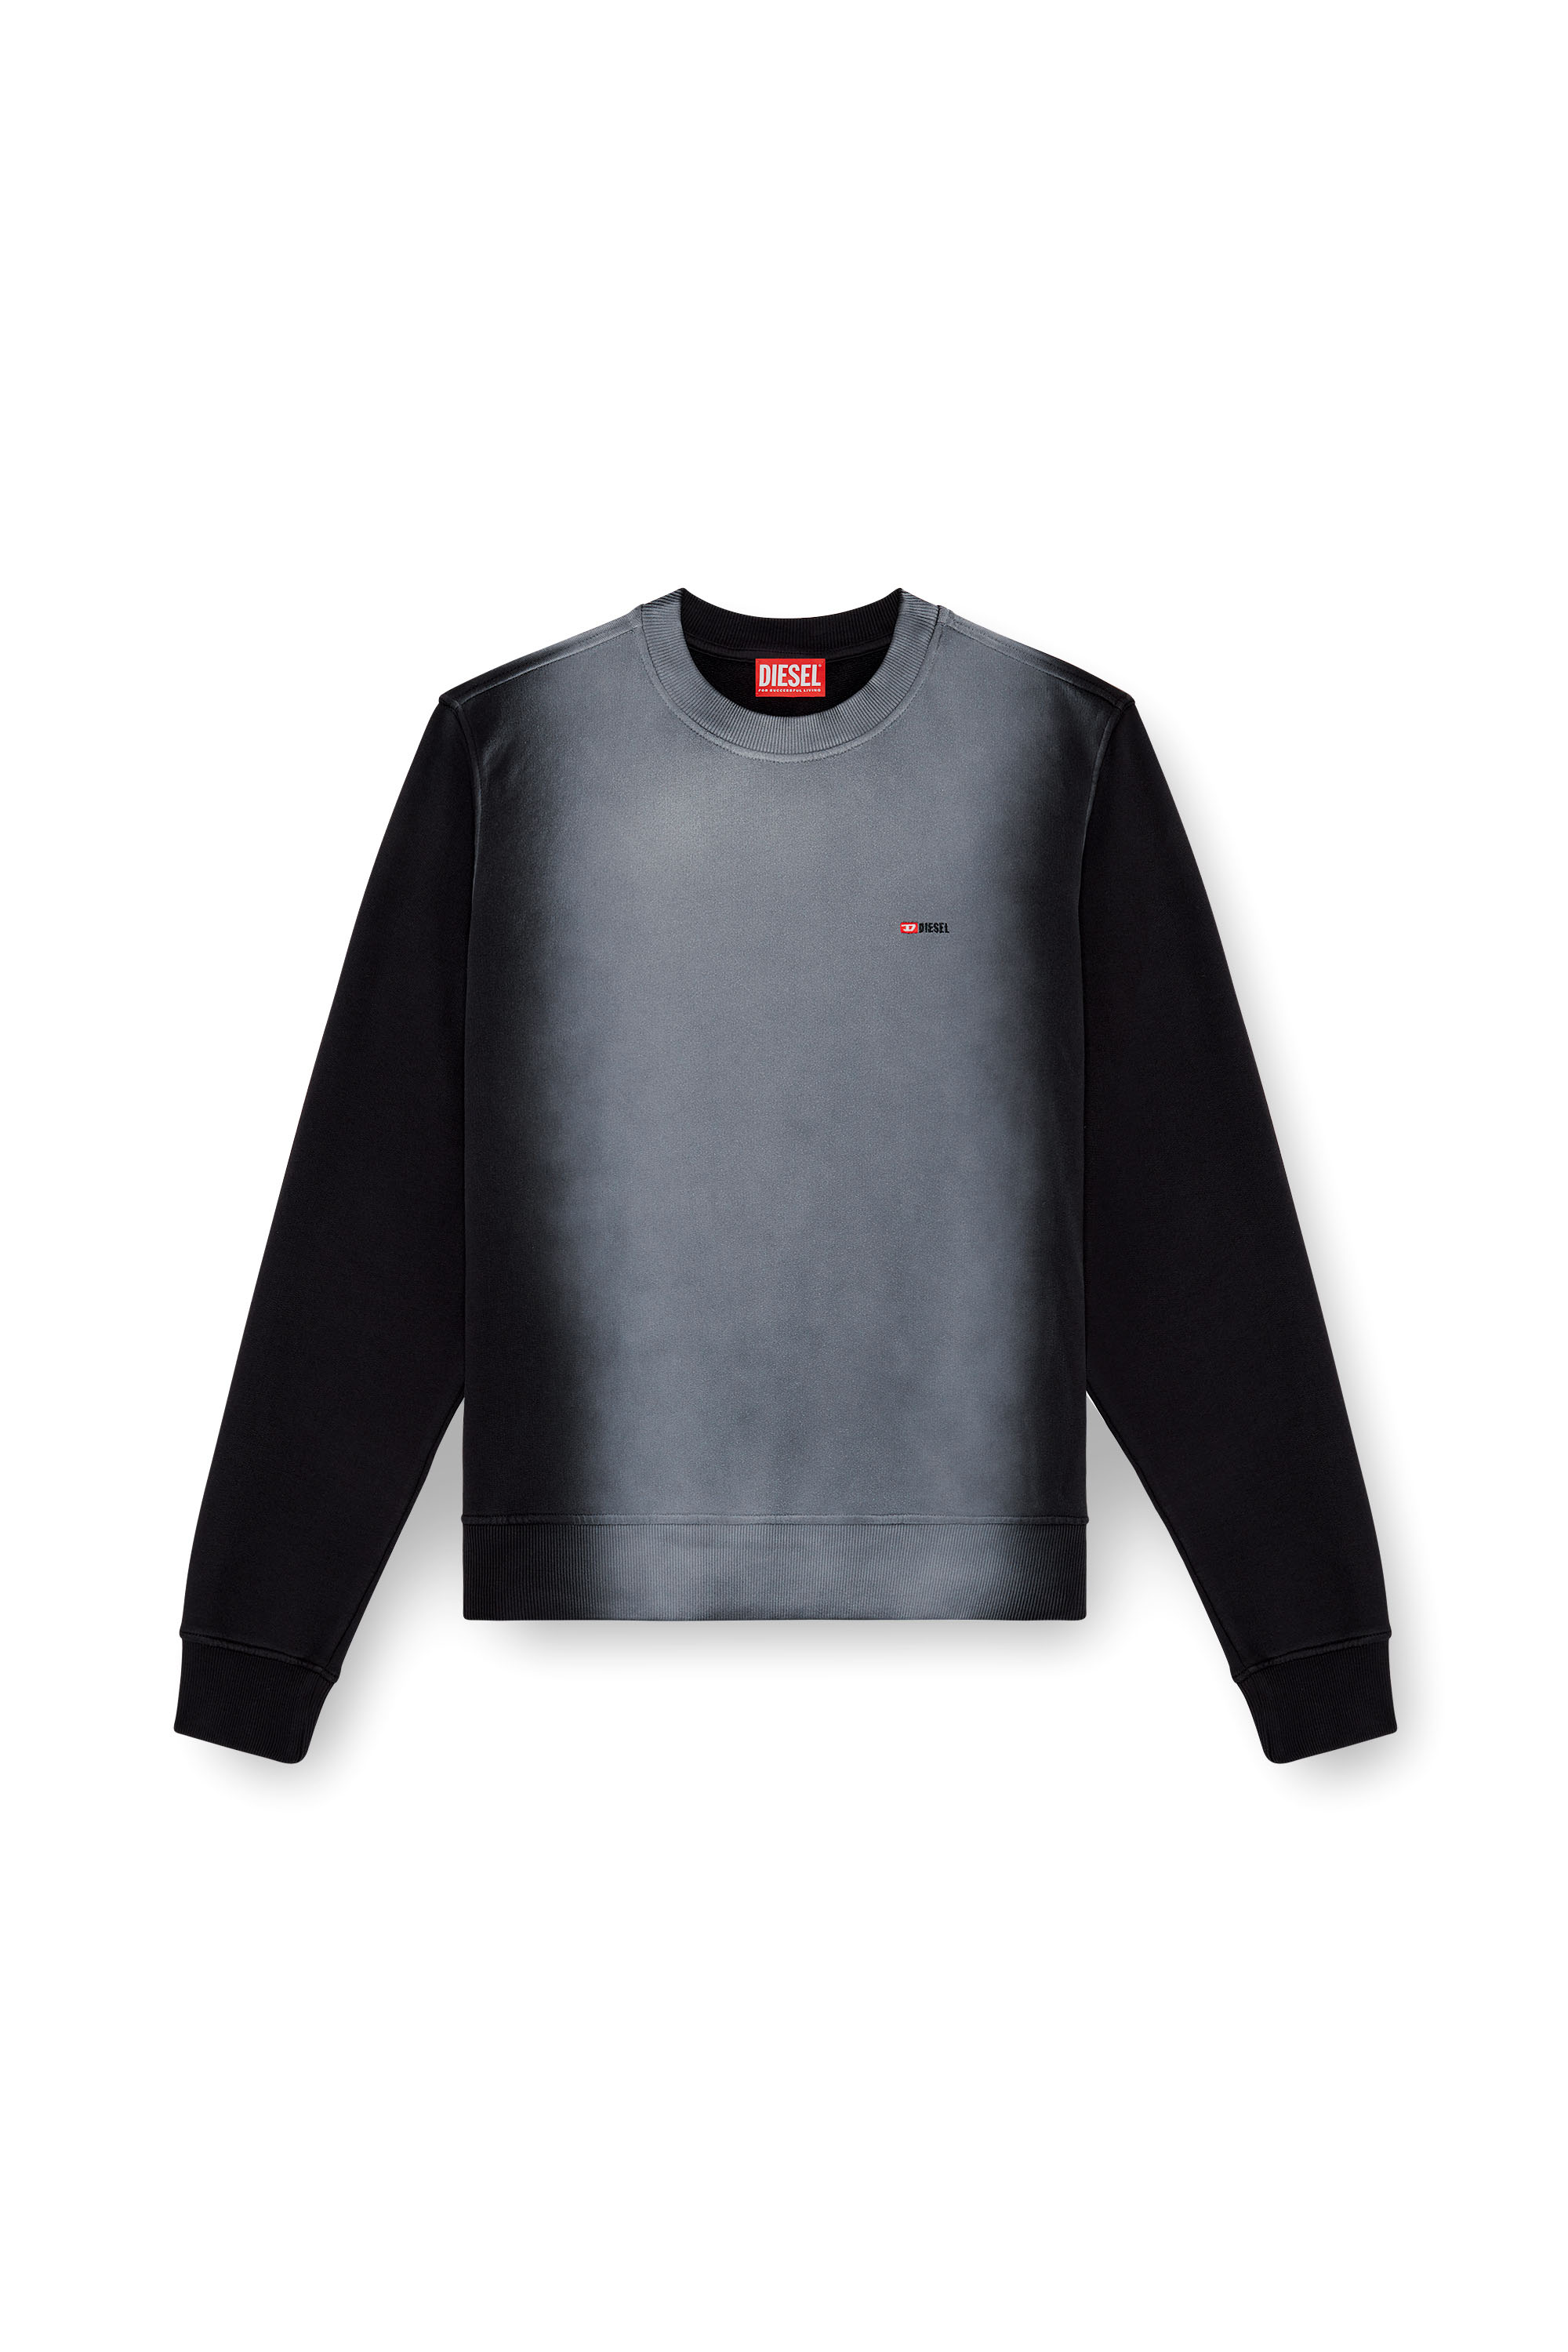 Diesel - S-GINN-K48, Man Cotton sweatshirt with faded patches in Black - Image 3